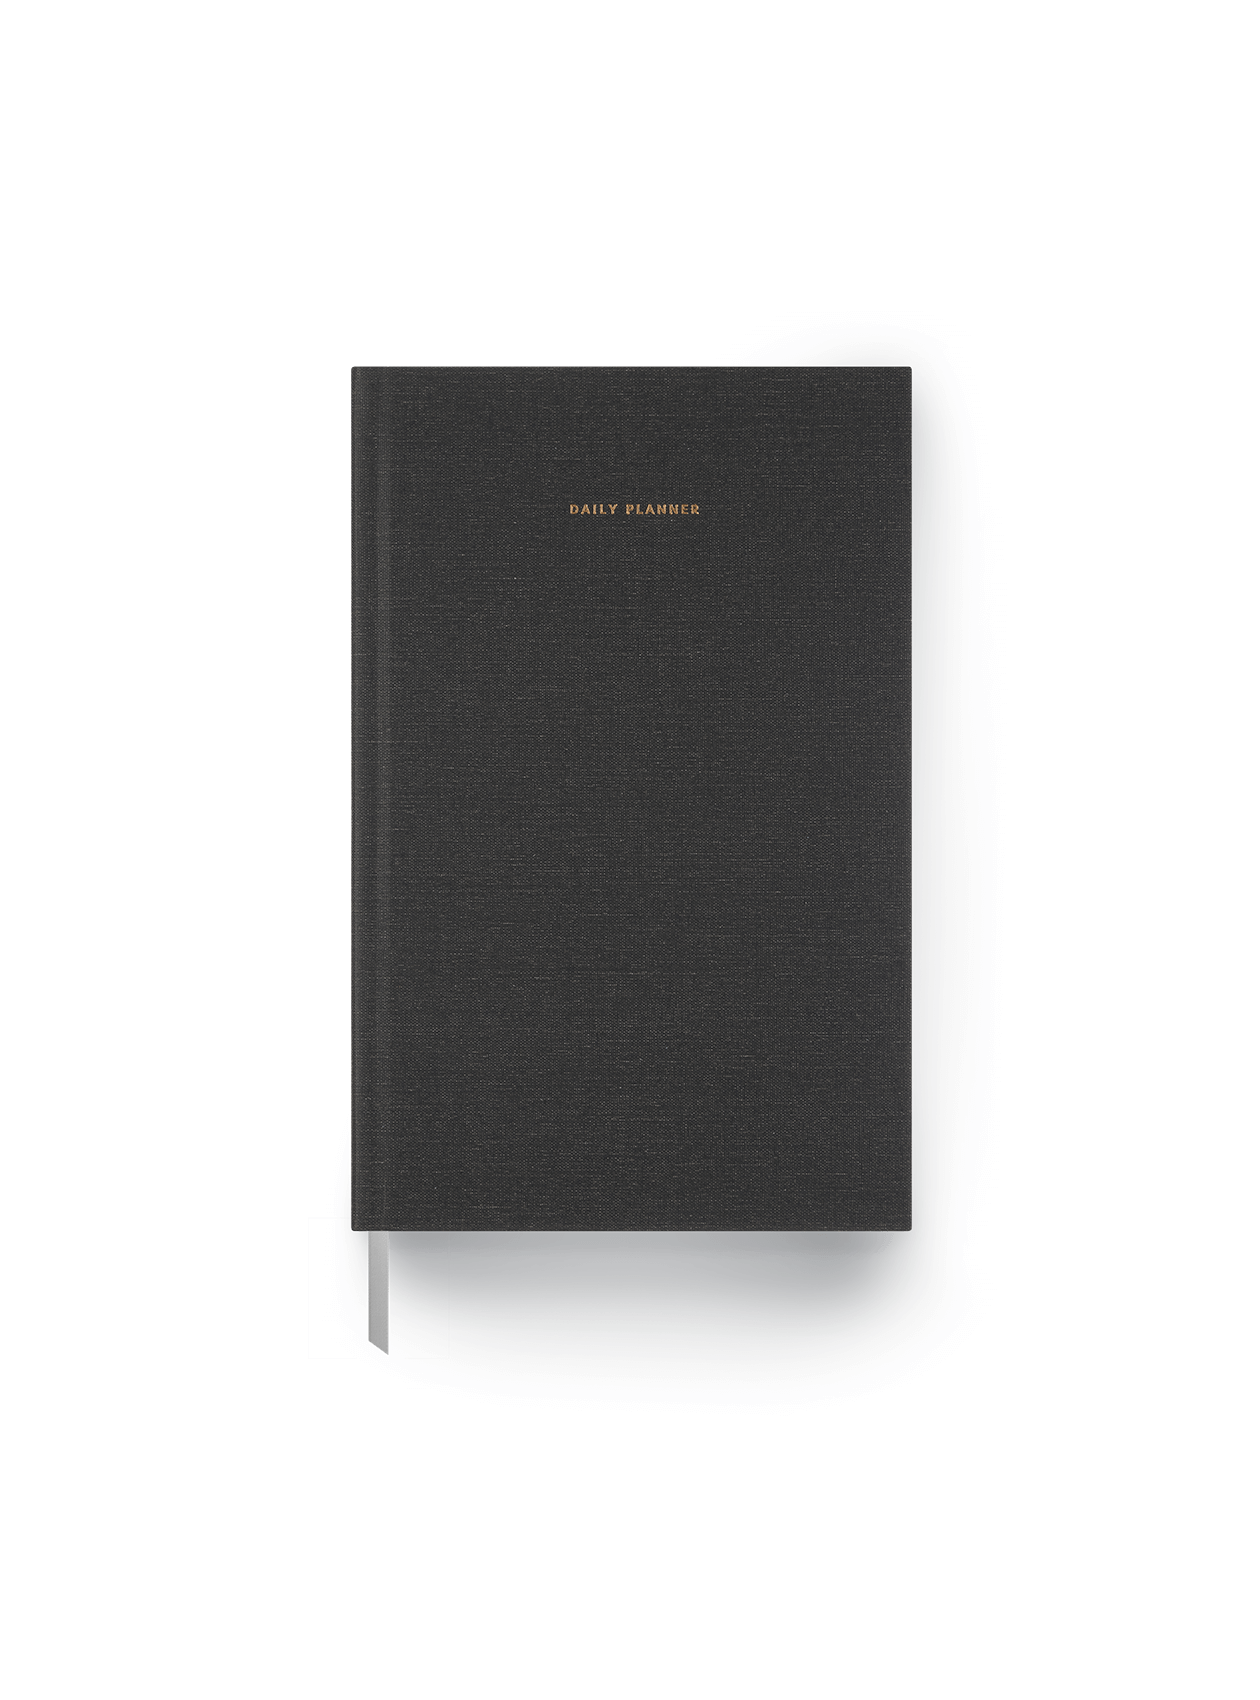 The Appointed 23-24 Daily Planner in Charcoal Gray with casebound hardcover and gold foil details || Charcoal Gray